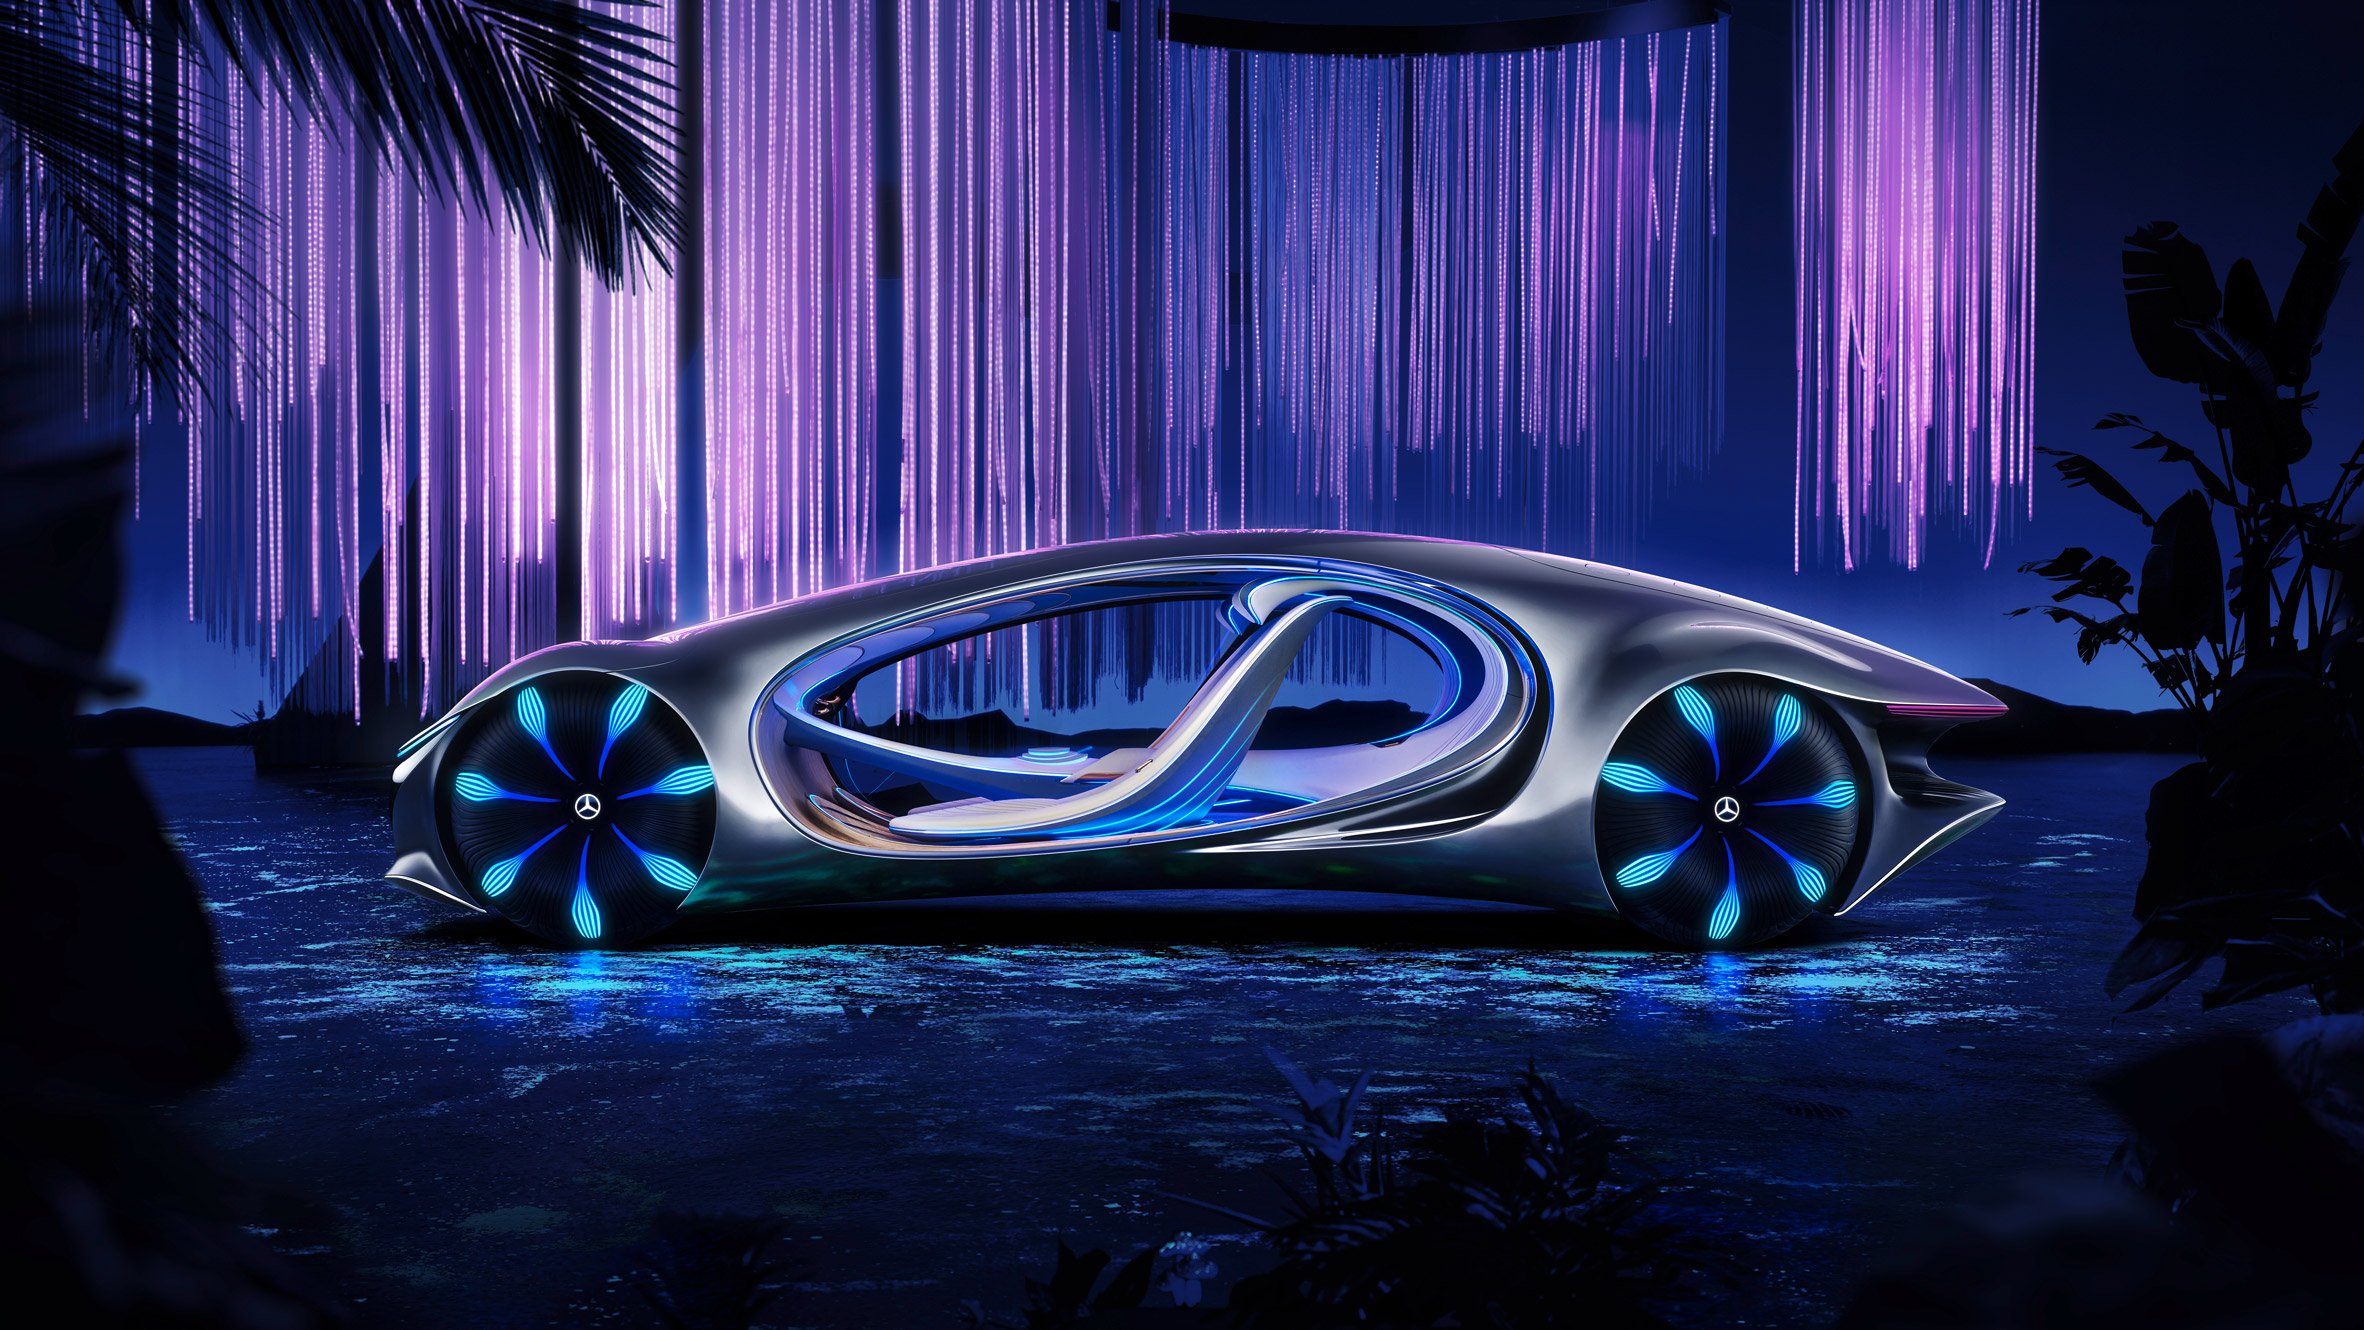 Mercedes Benz Unveils Avatar Inspired Concept Car At Ces 2020